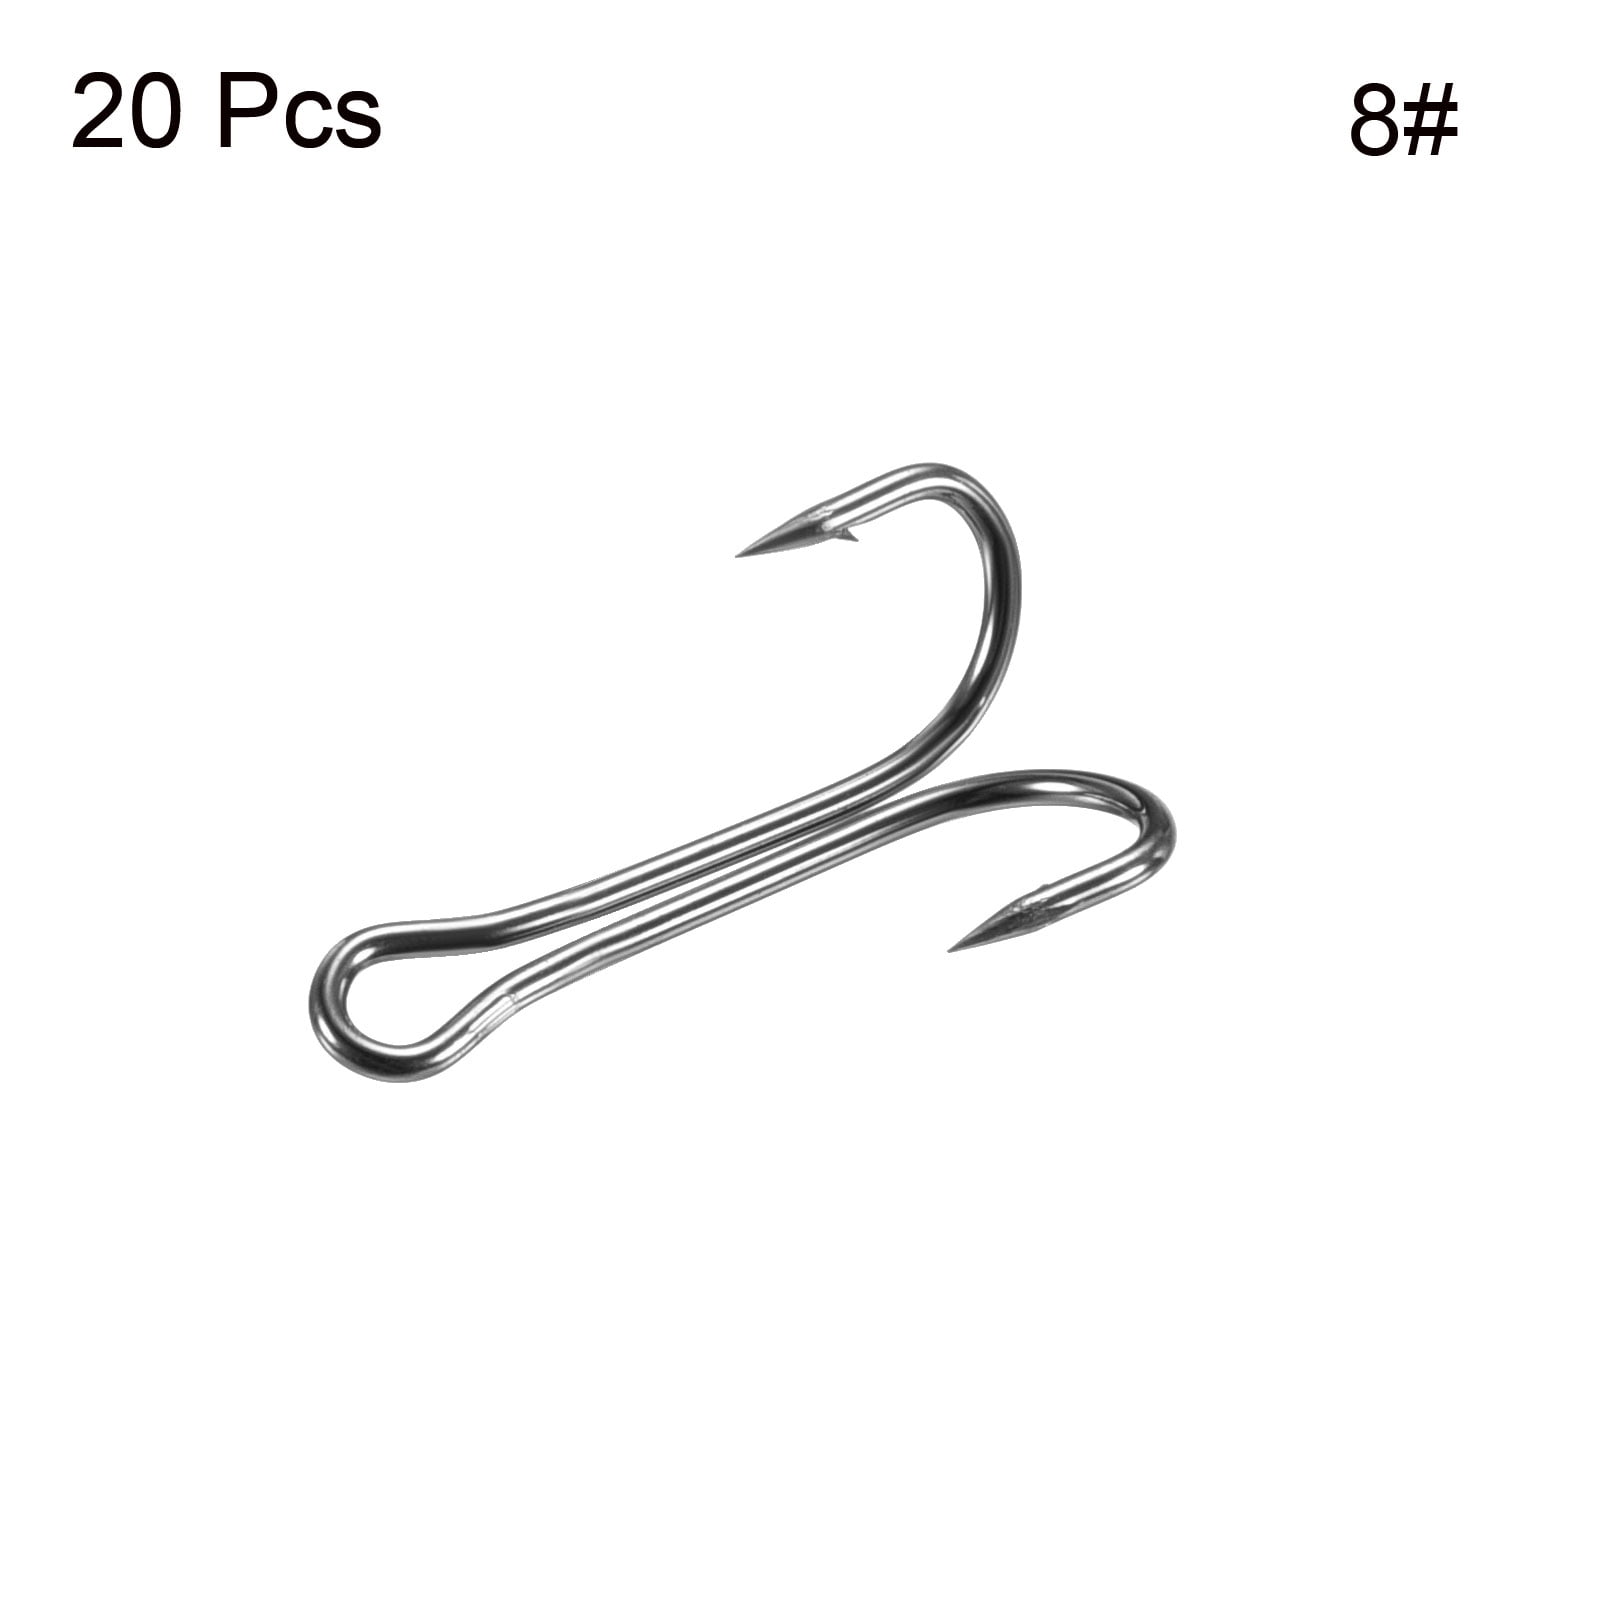 Gama EWG Dbl Frog Hooks Black 4/0 3pk - Fin Feather Fur Outfitters